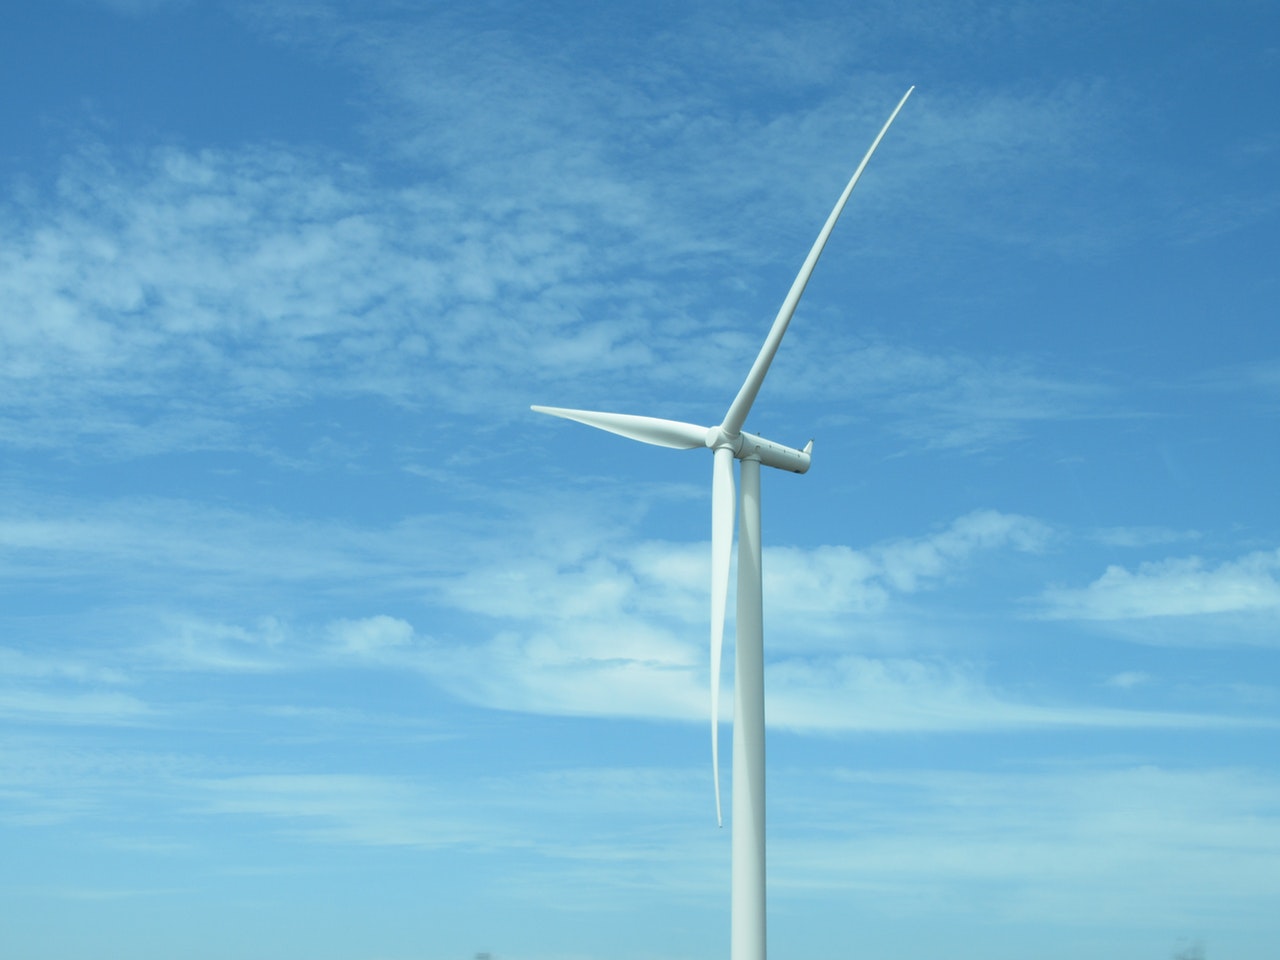 A picture of a wind turbine from the sky